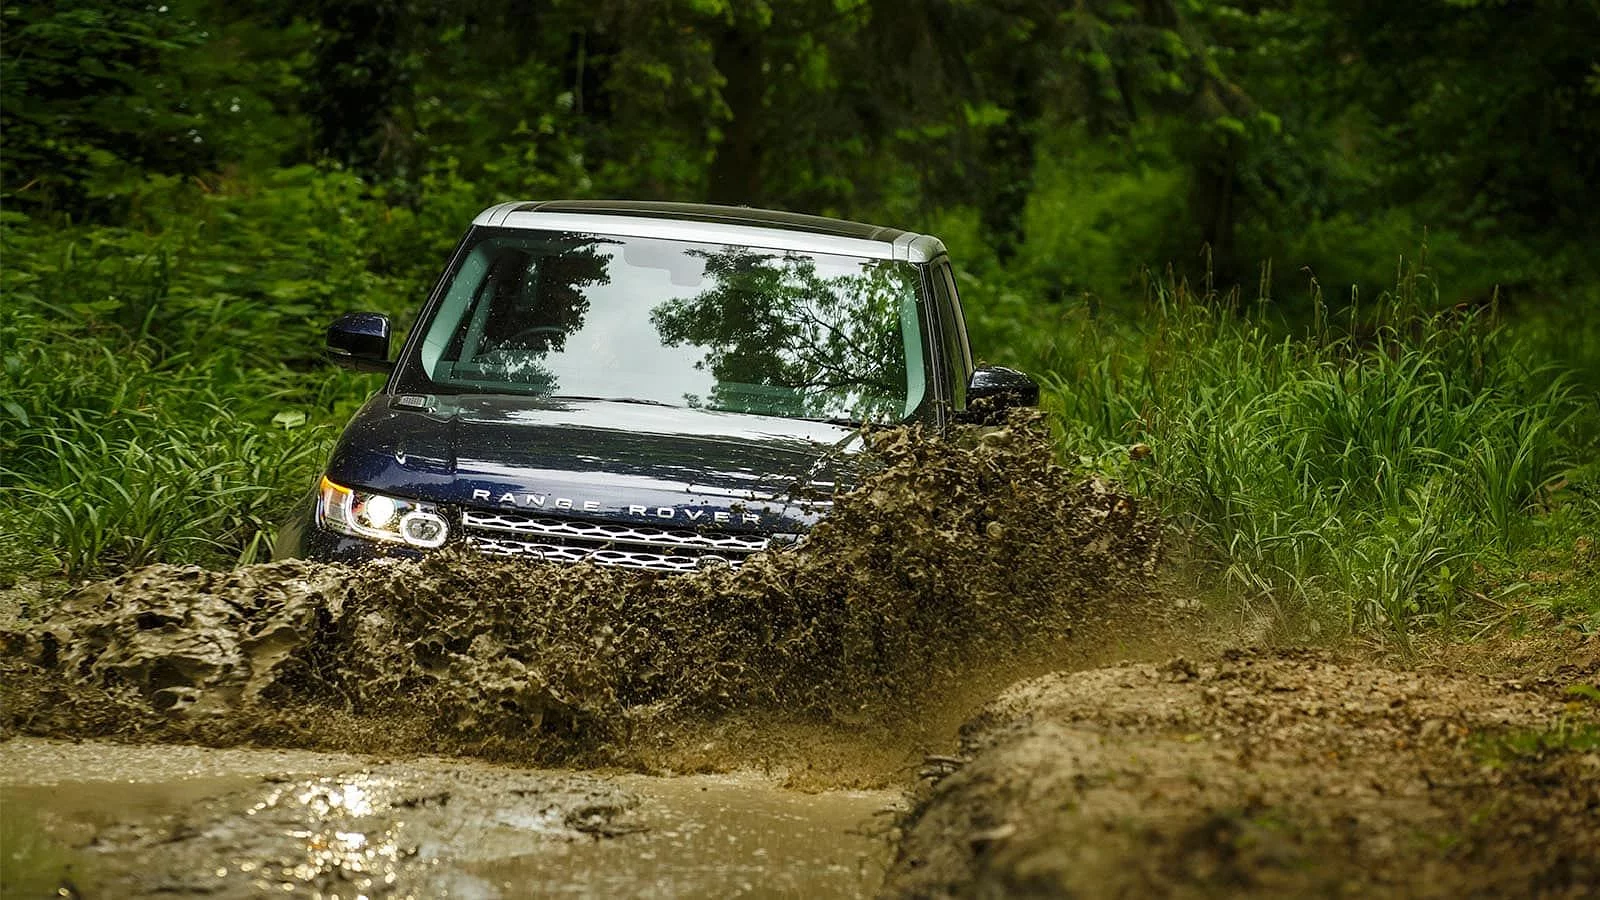 1. EASTNOR CASTLE ΚΑΙ LAND ROVER EXPERIENCE